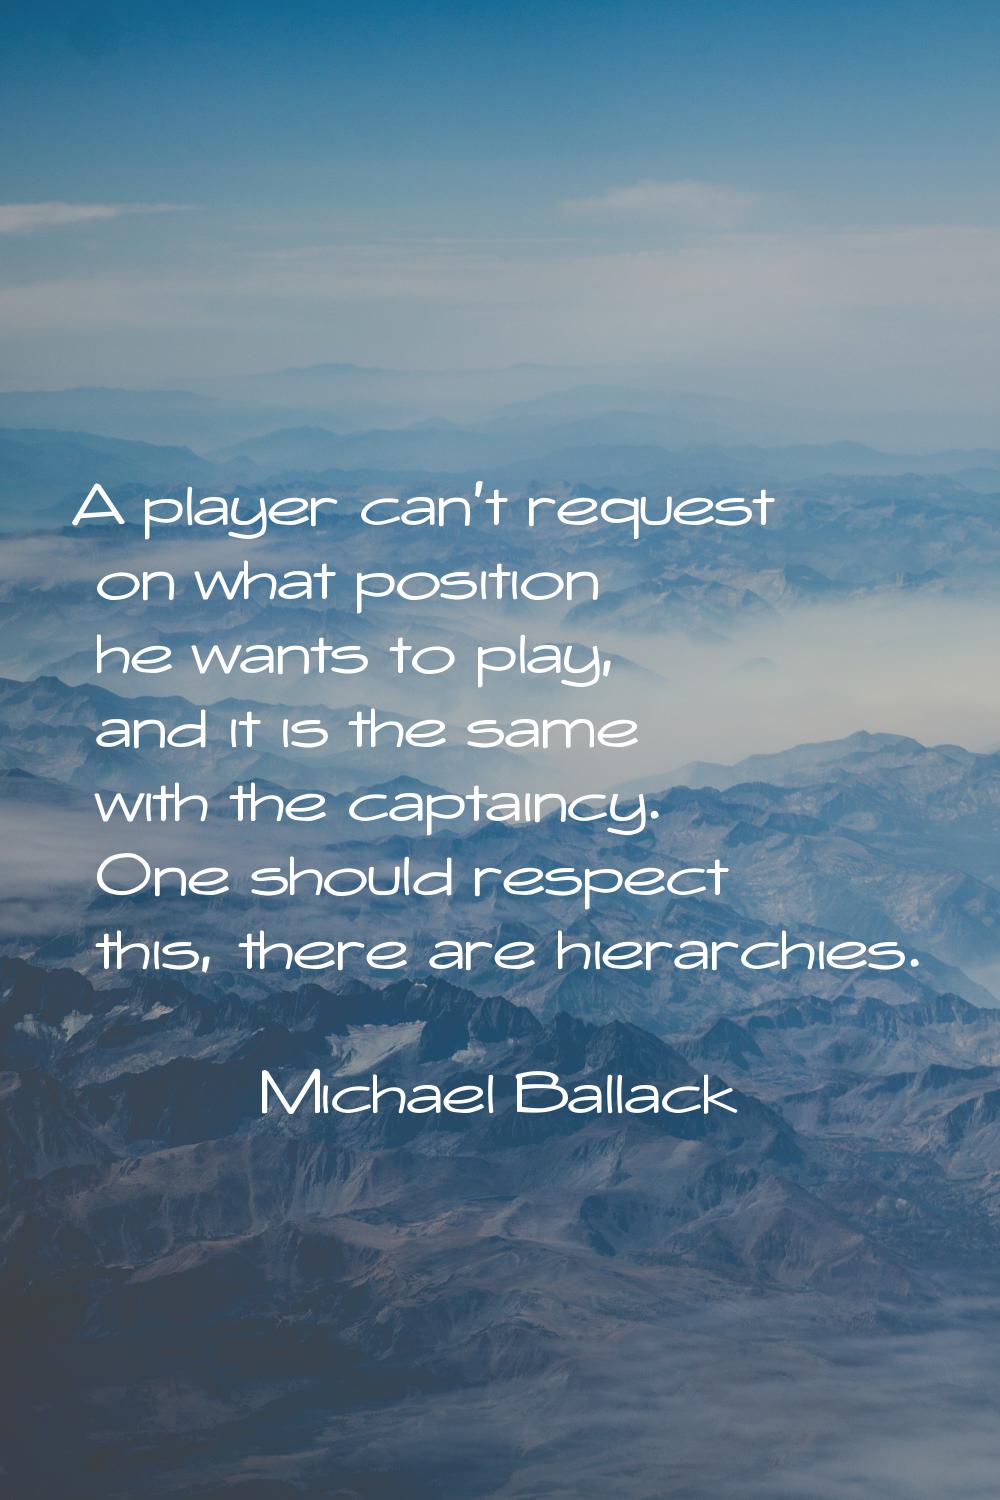 A player can't request on what position he wants to play, and it is the same with the captaincy. On